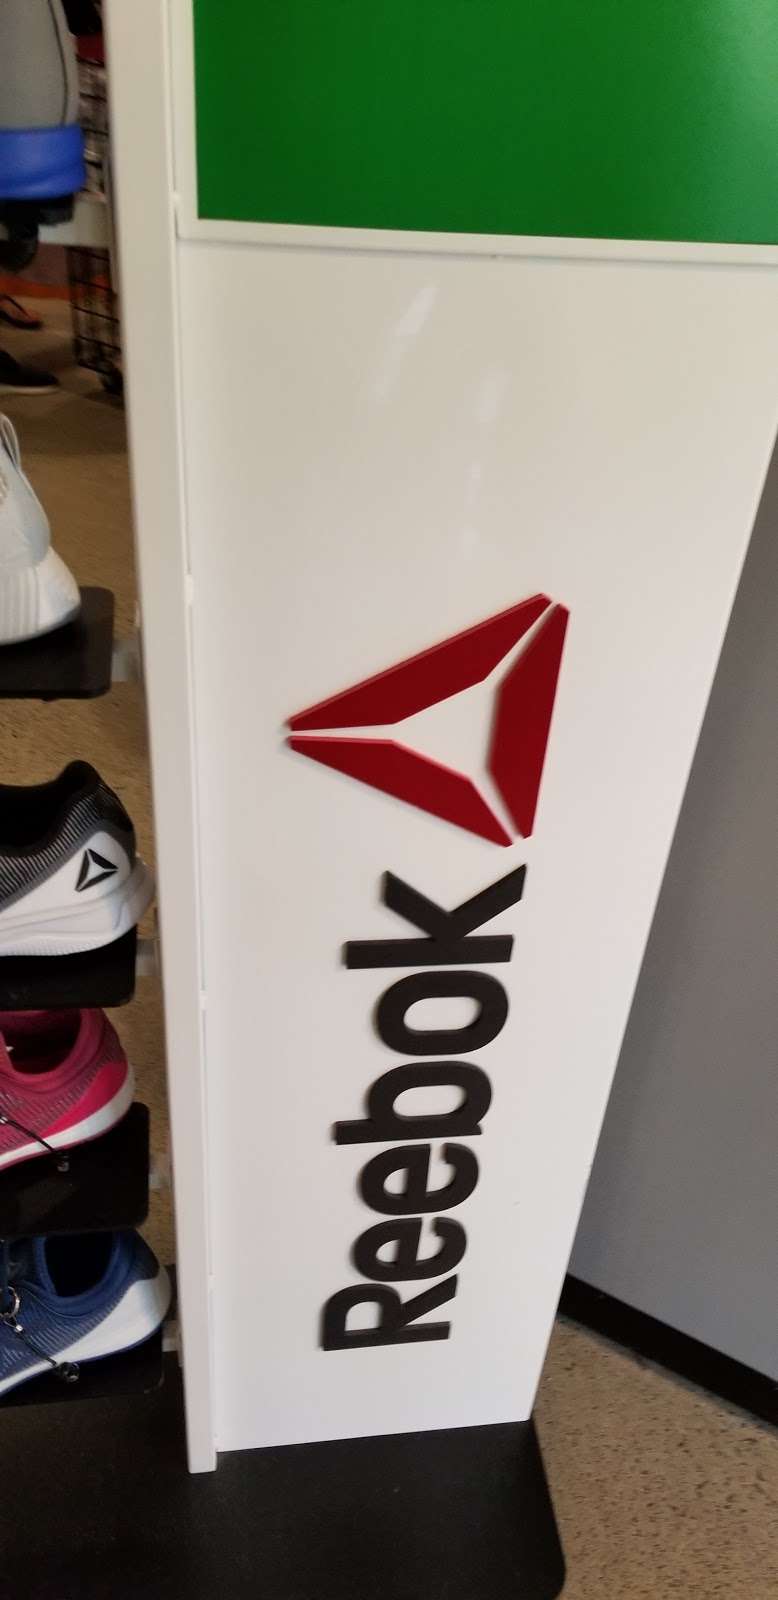 Reebok Outlet | 1000 Premium Outlets Dr, Tannersville, PA 18372 | Phone: (570) 620-0870